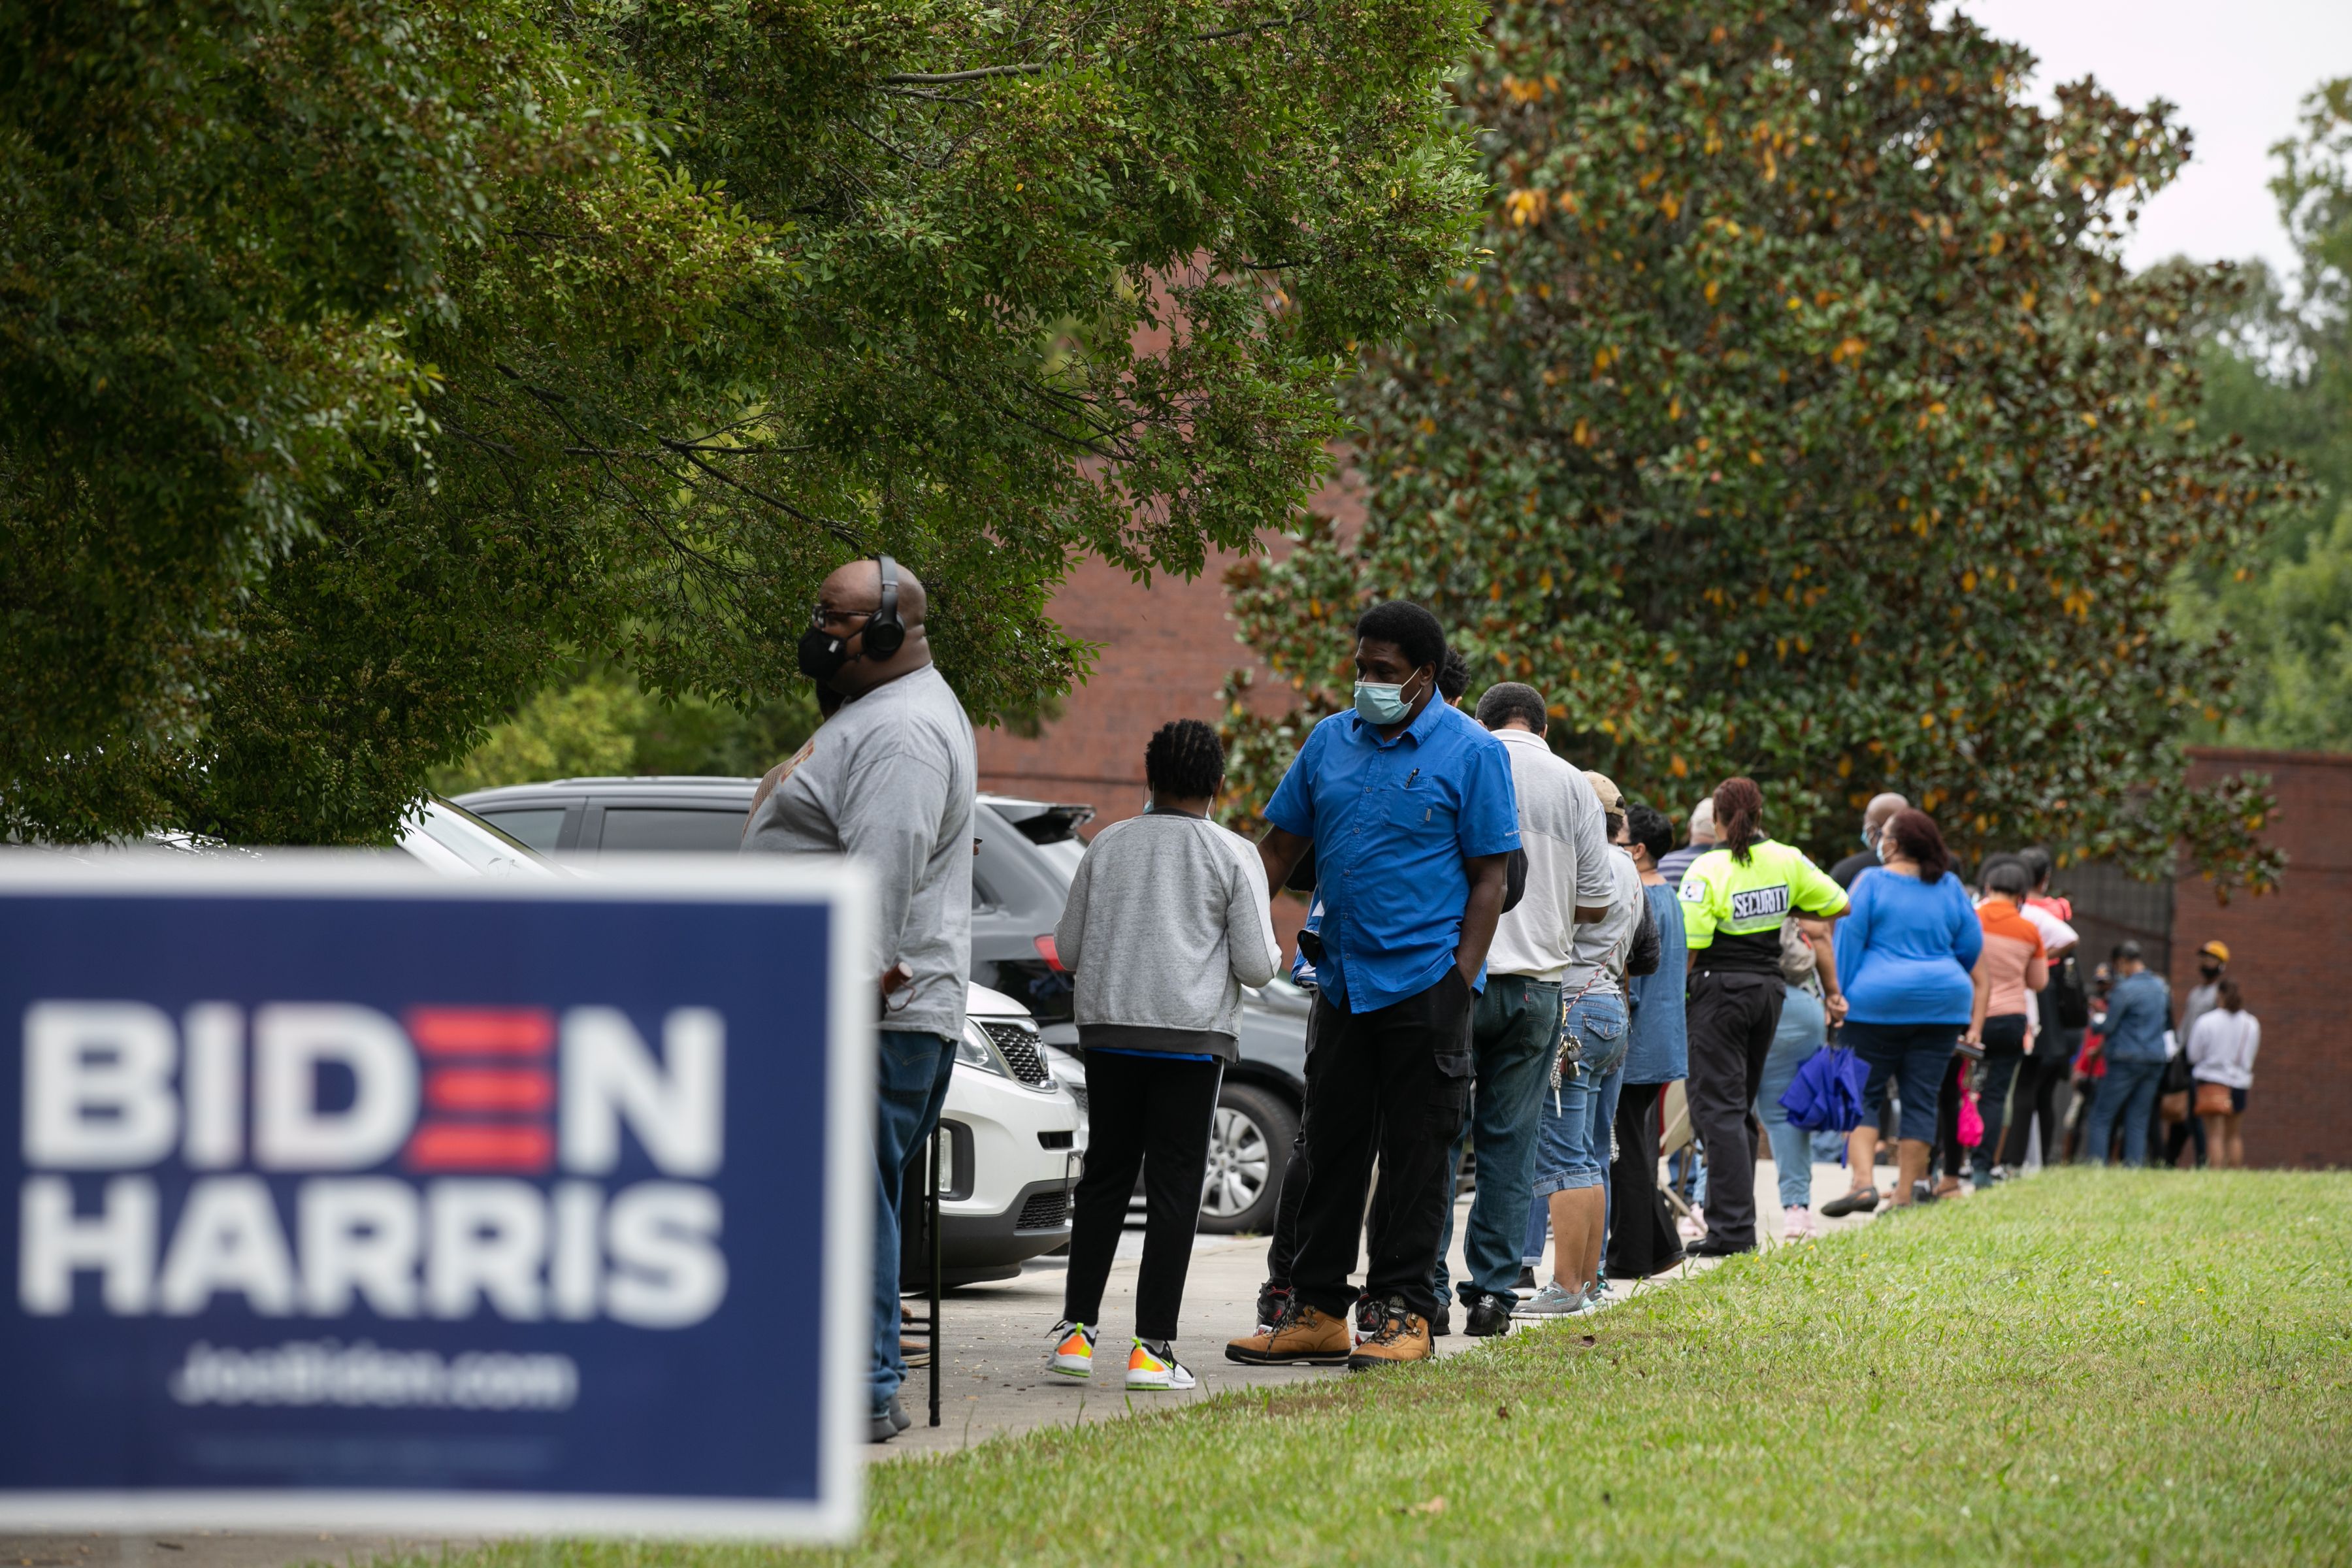 People stand in line on the first day of early voting for the general election at the C.T. Martin Natatorium and Recreation Center on October 12, 2020 in Atlanta, Georgia.